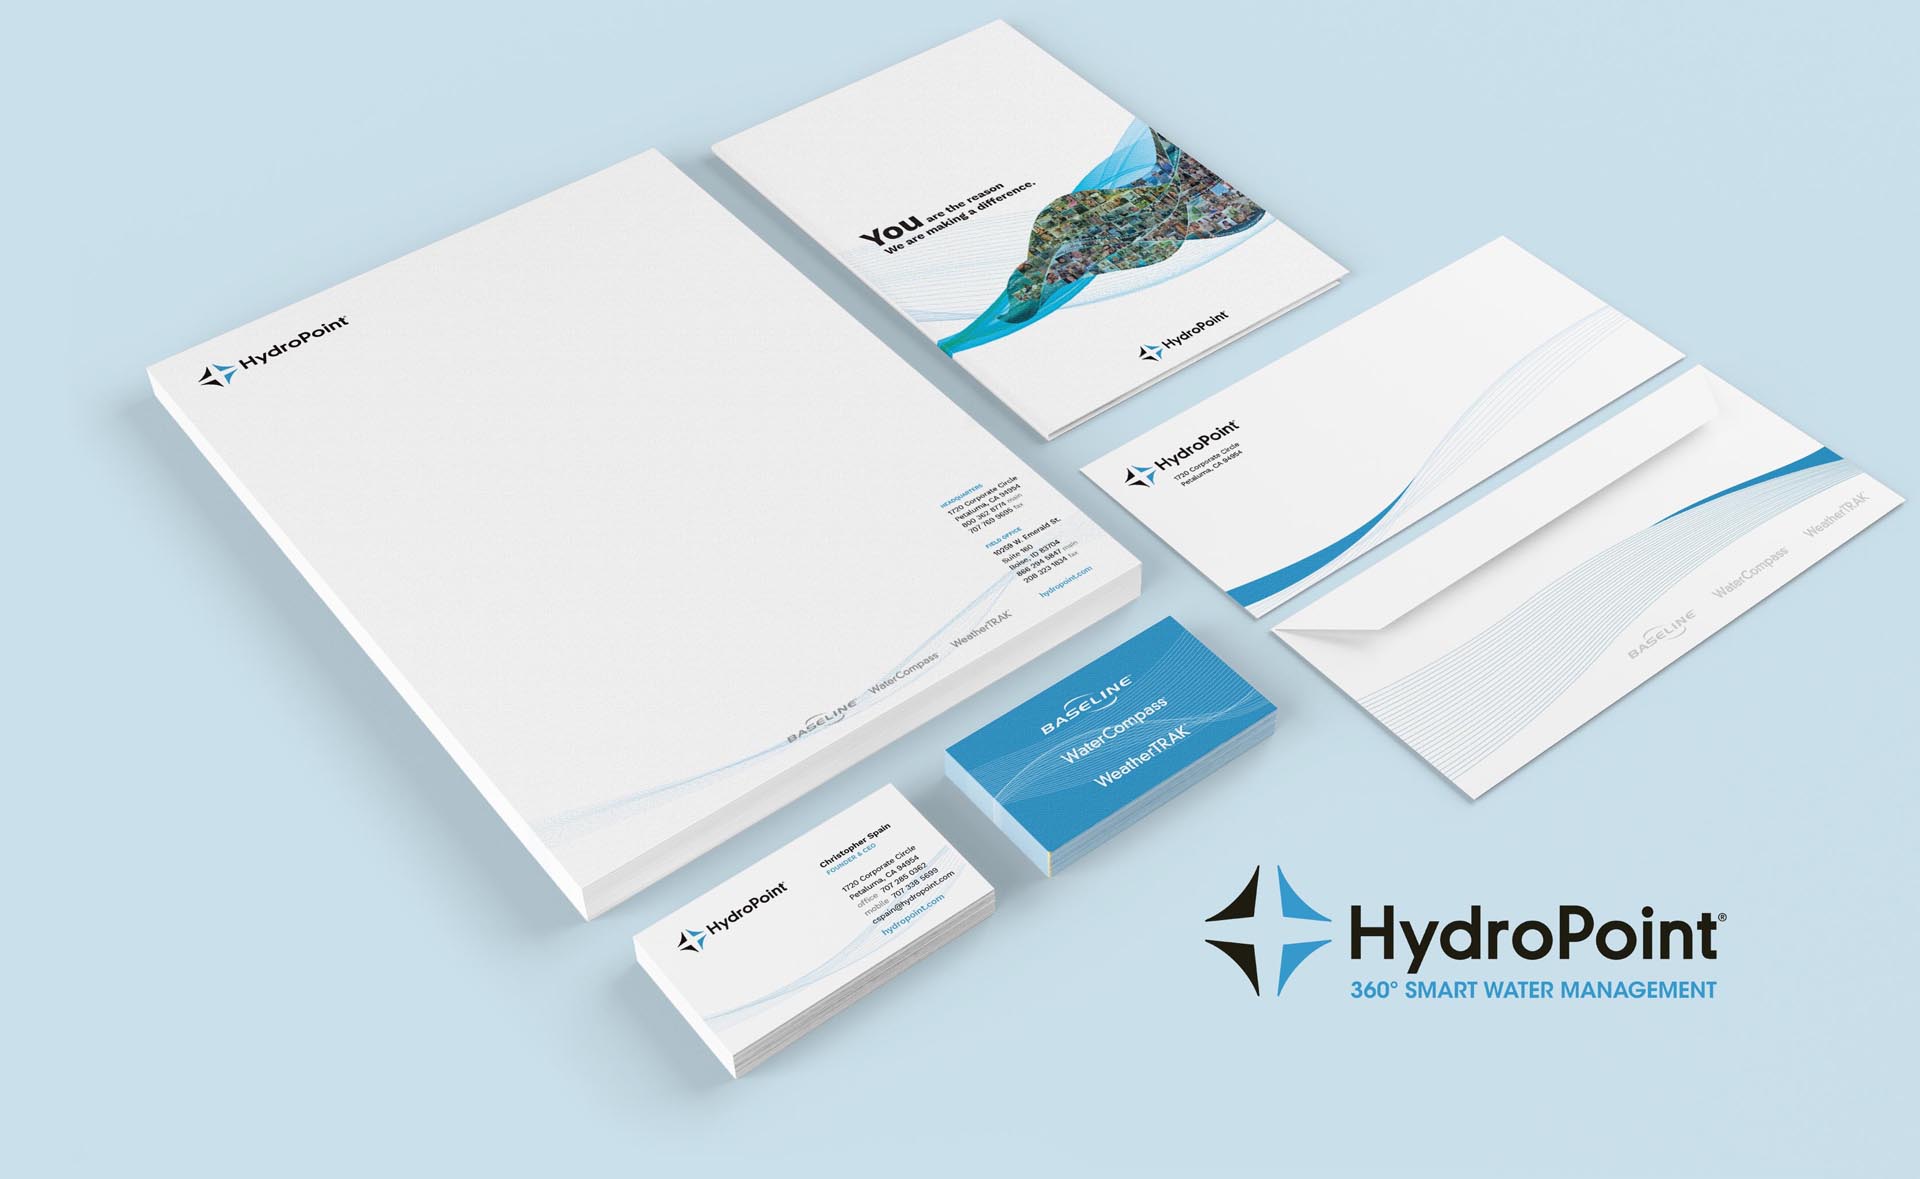 image of HydroPoint stationery